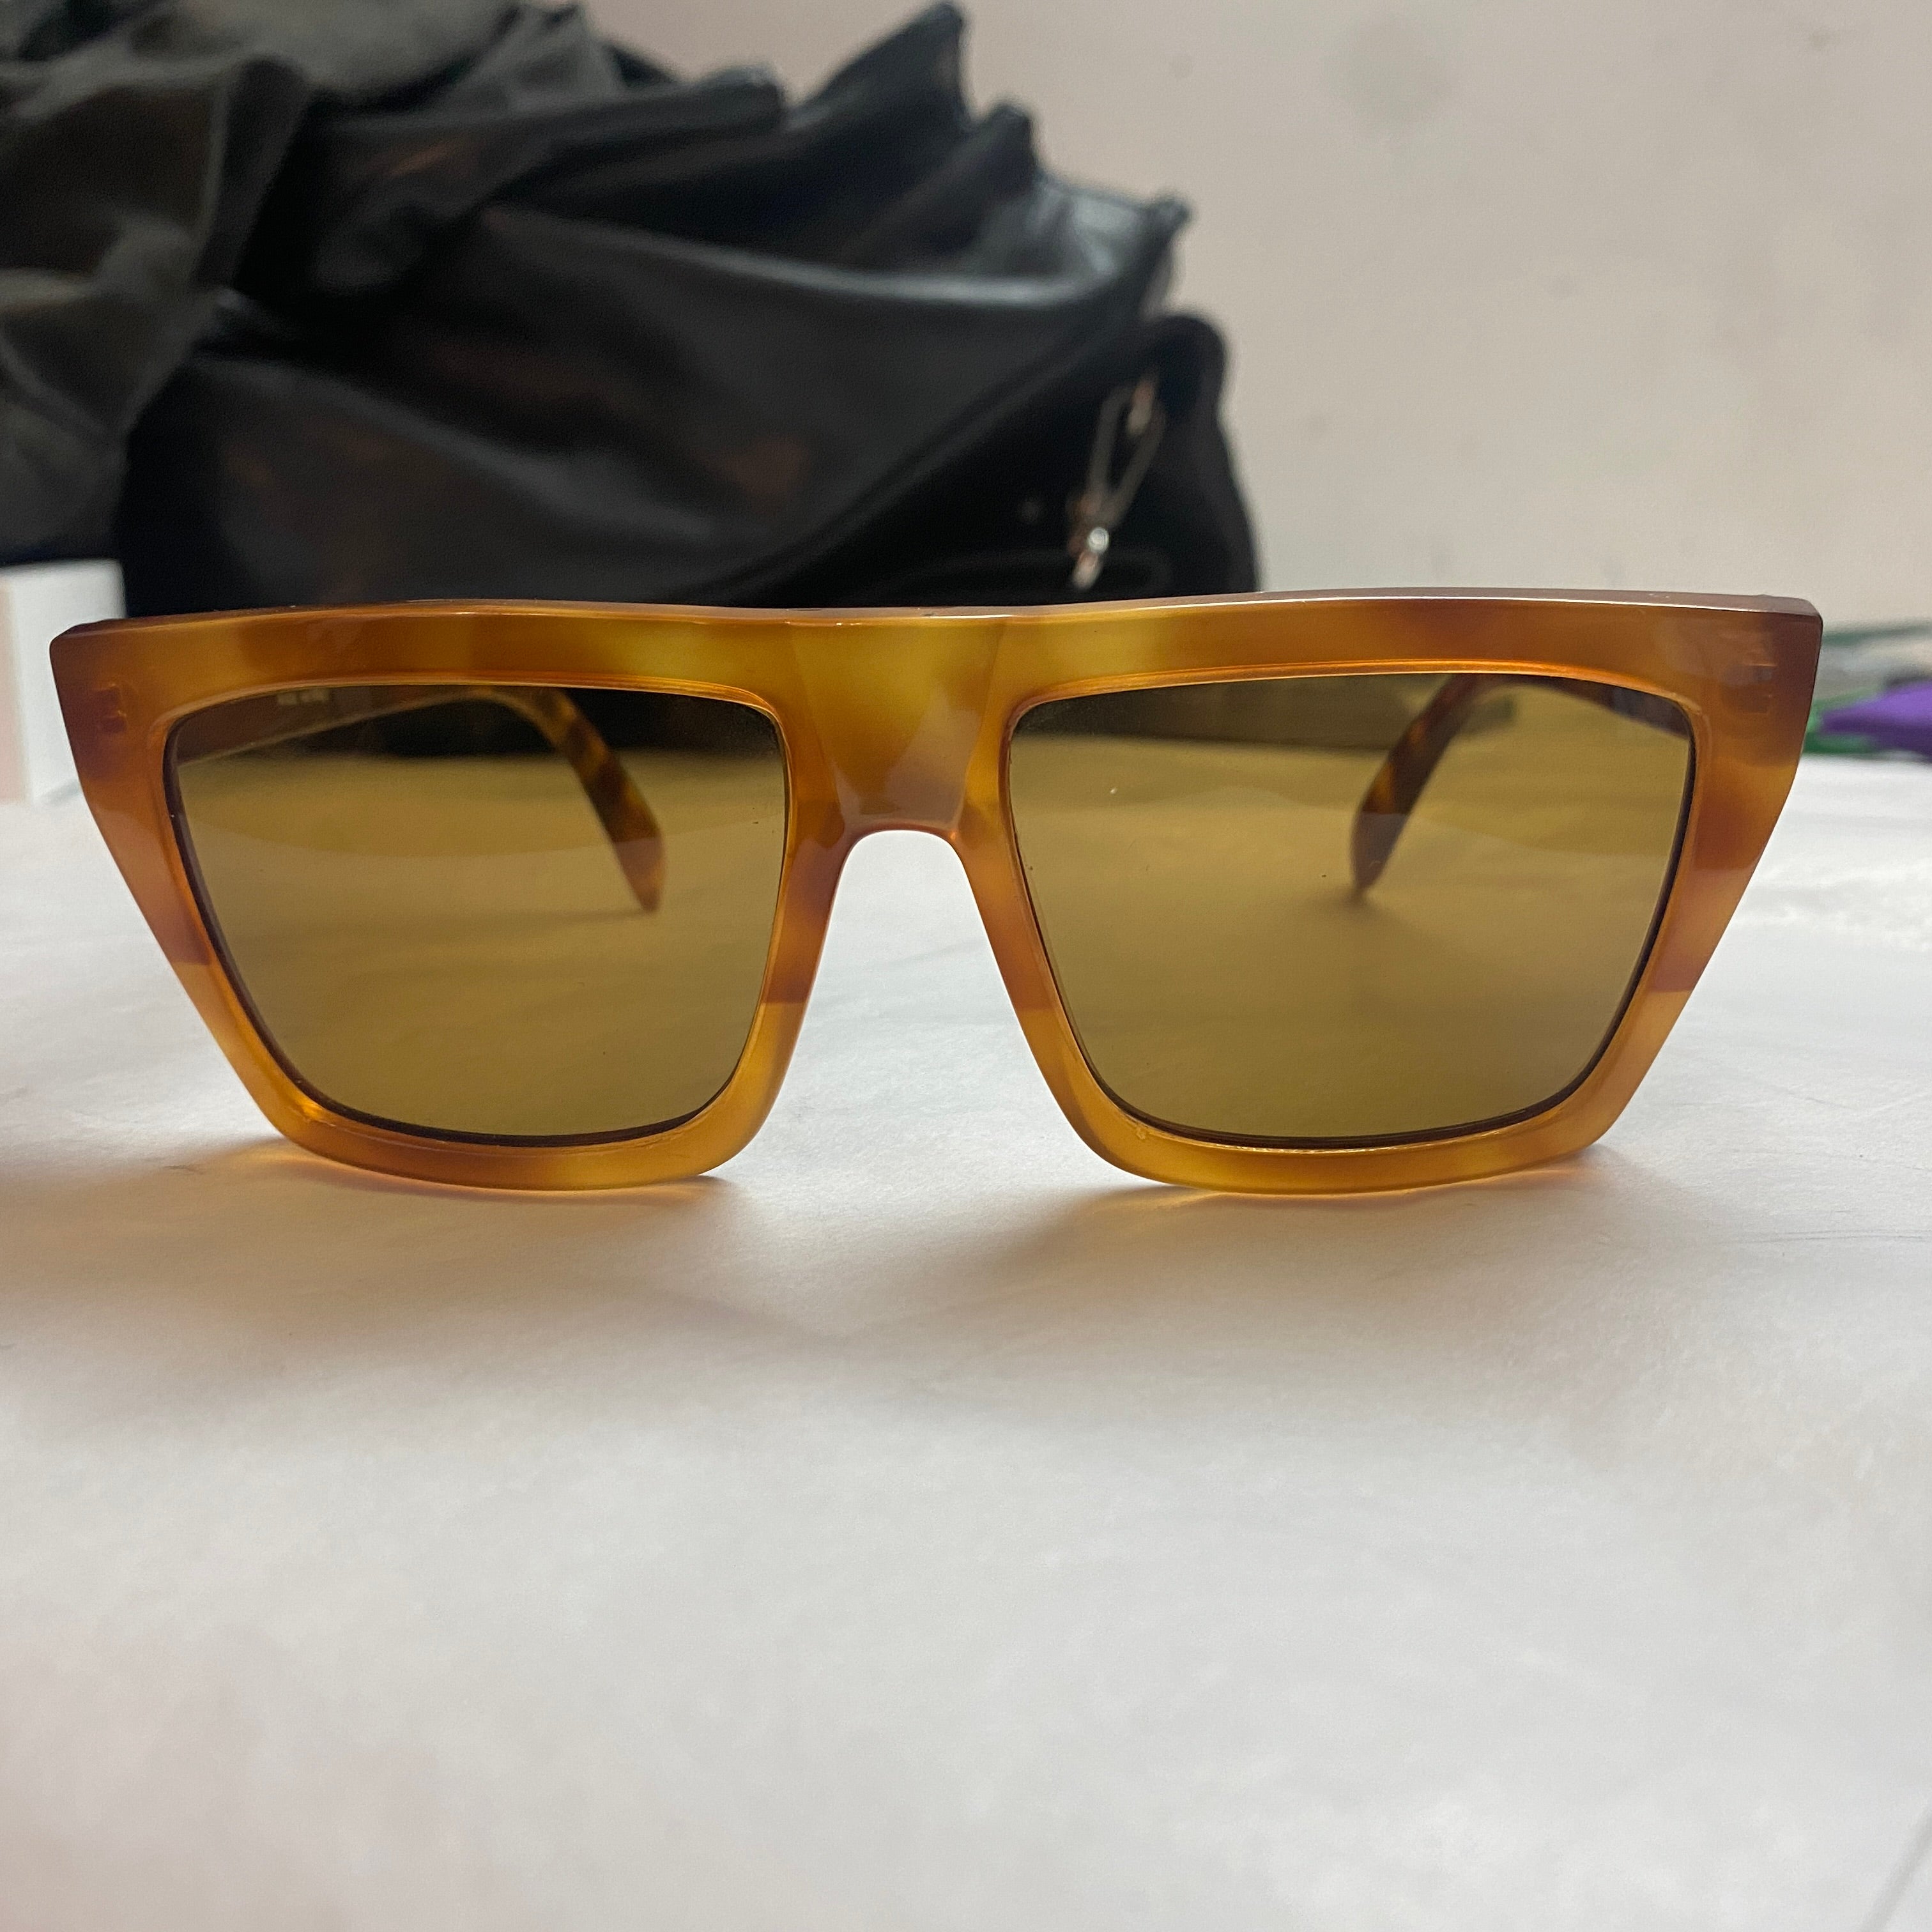 A fake tortoise oversized sunglasses designed by Gianni Versace and manufacutred in Italy in the Nineties, new lens, perfect condition of the sunglasses and superb vintage look makes them exclusive. 